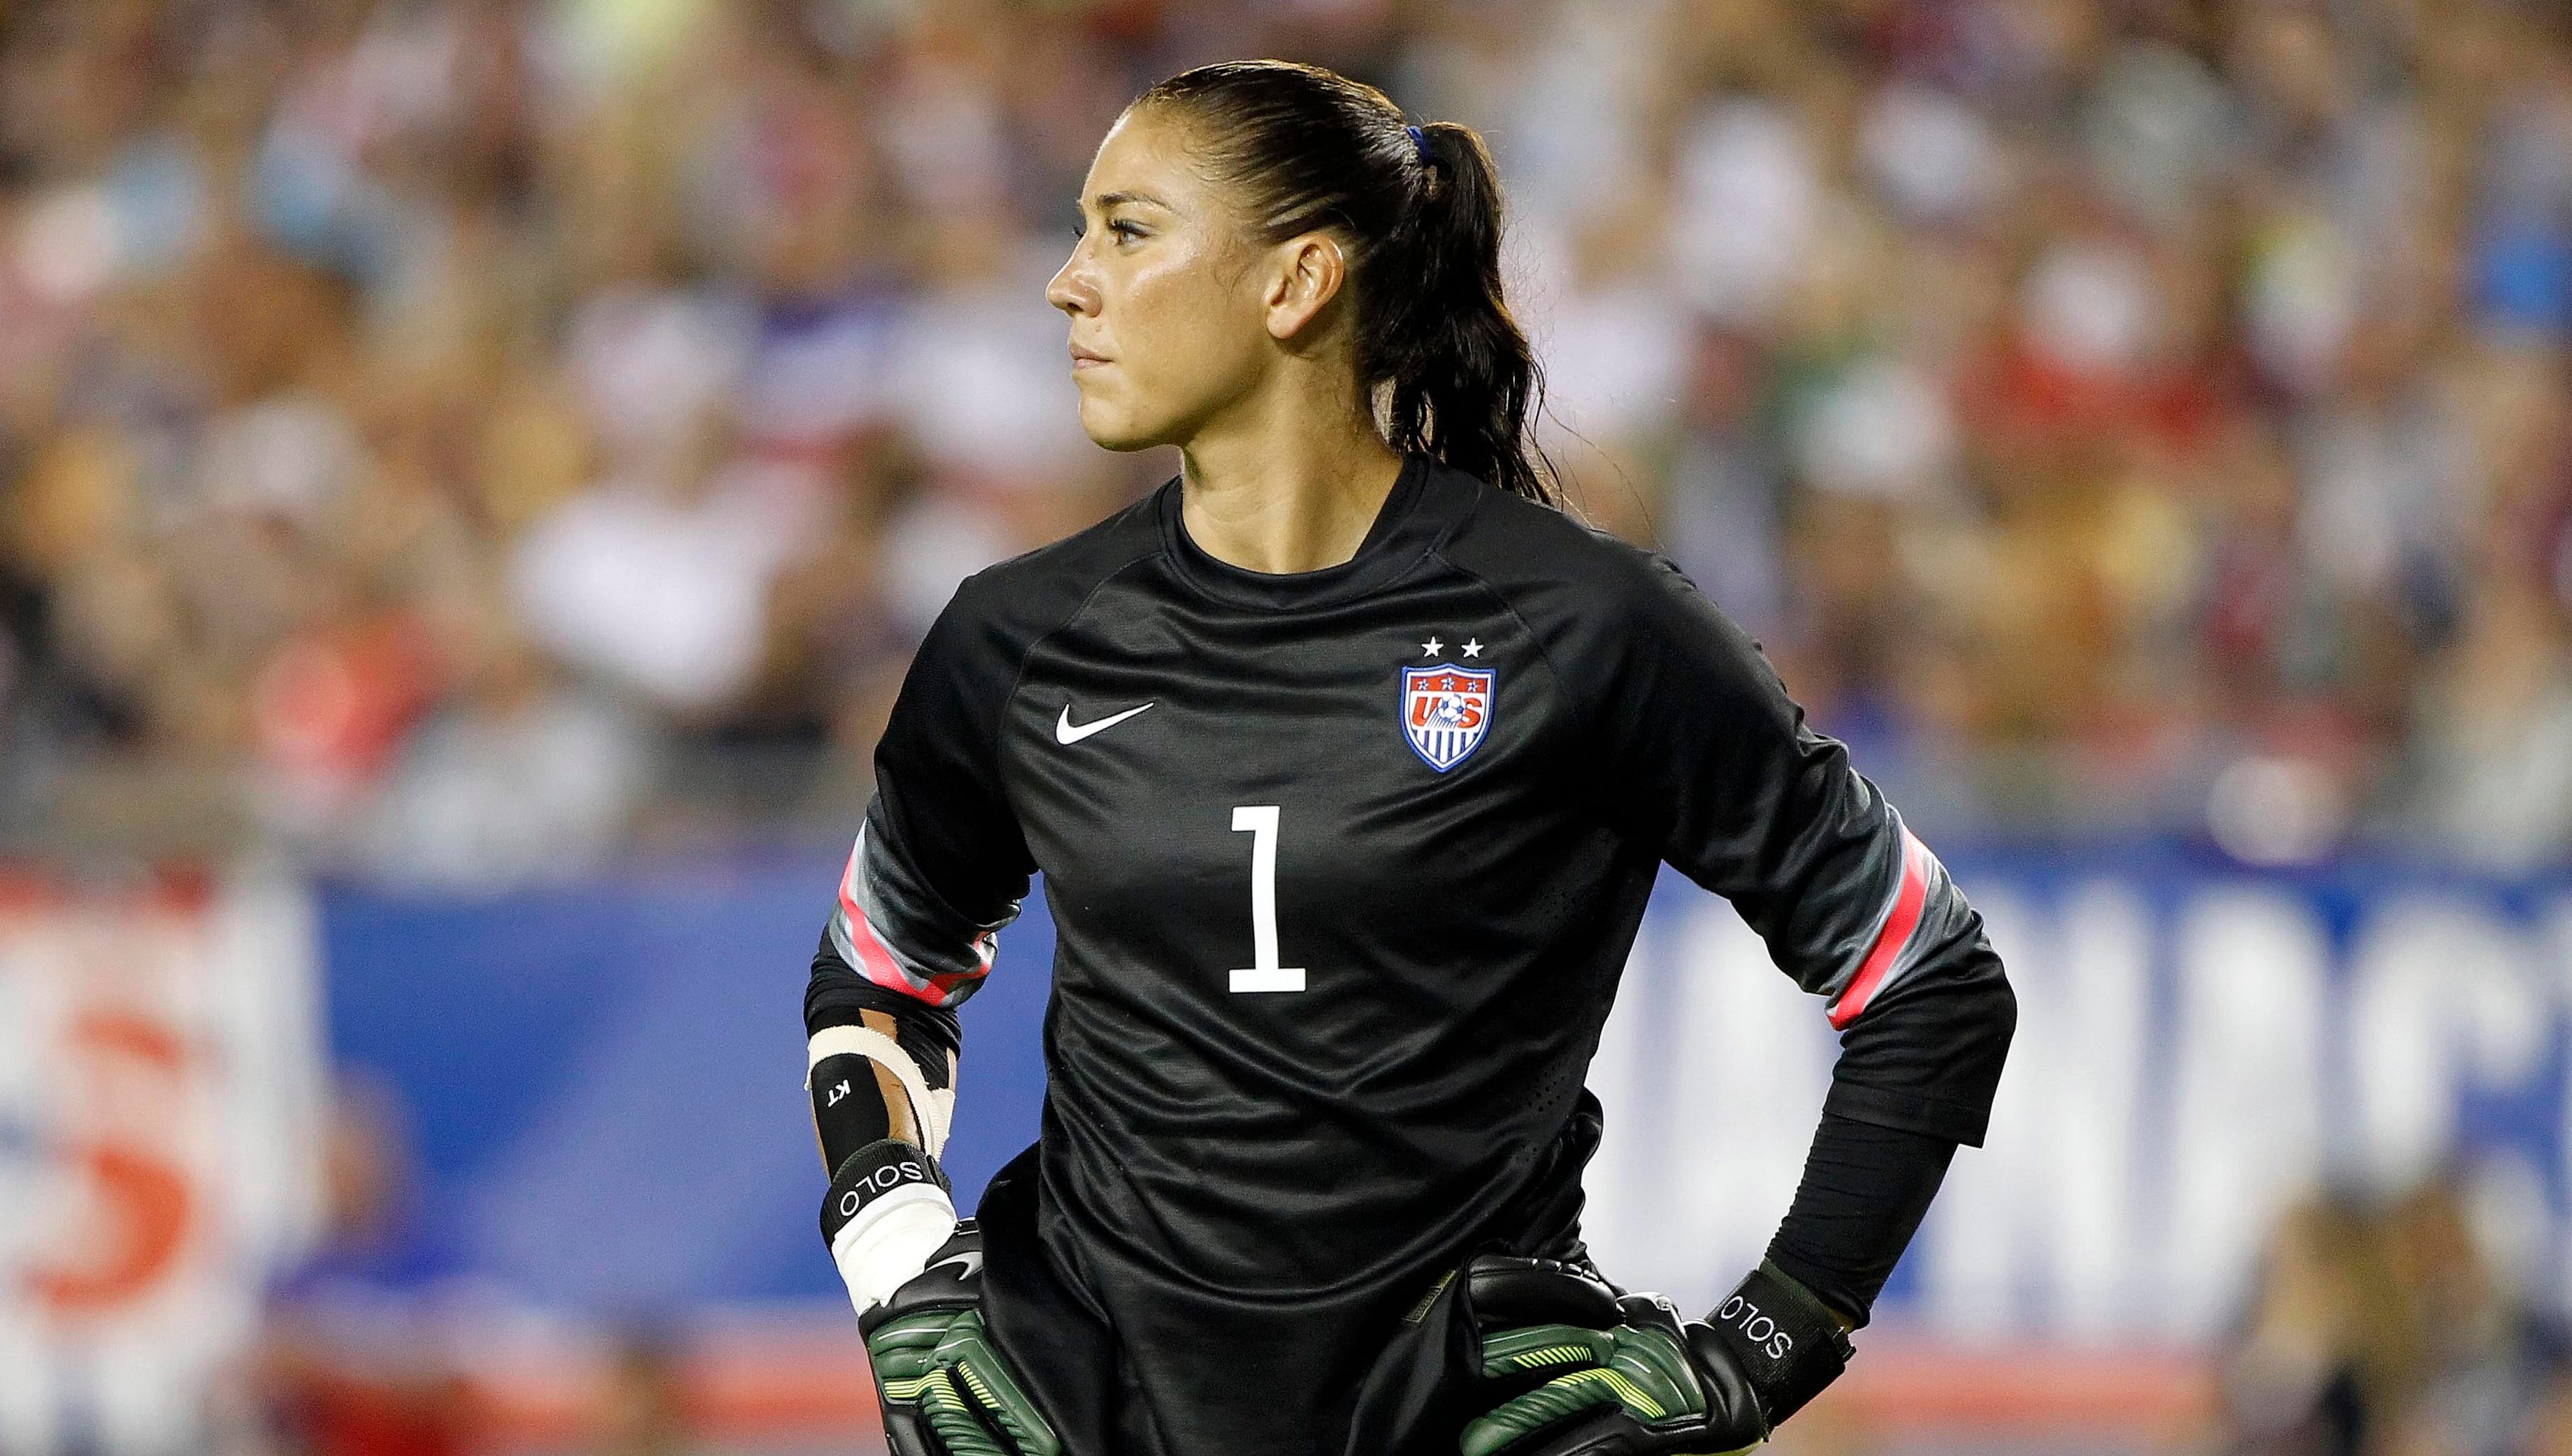 Hope solo pic